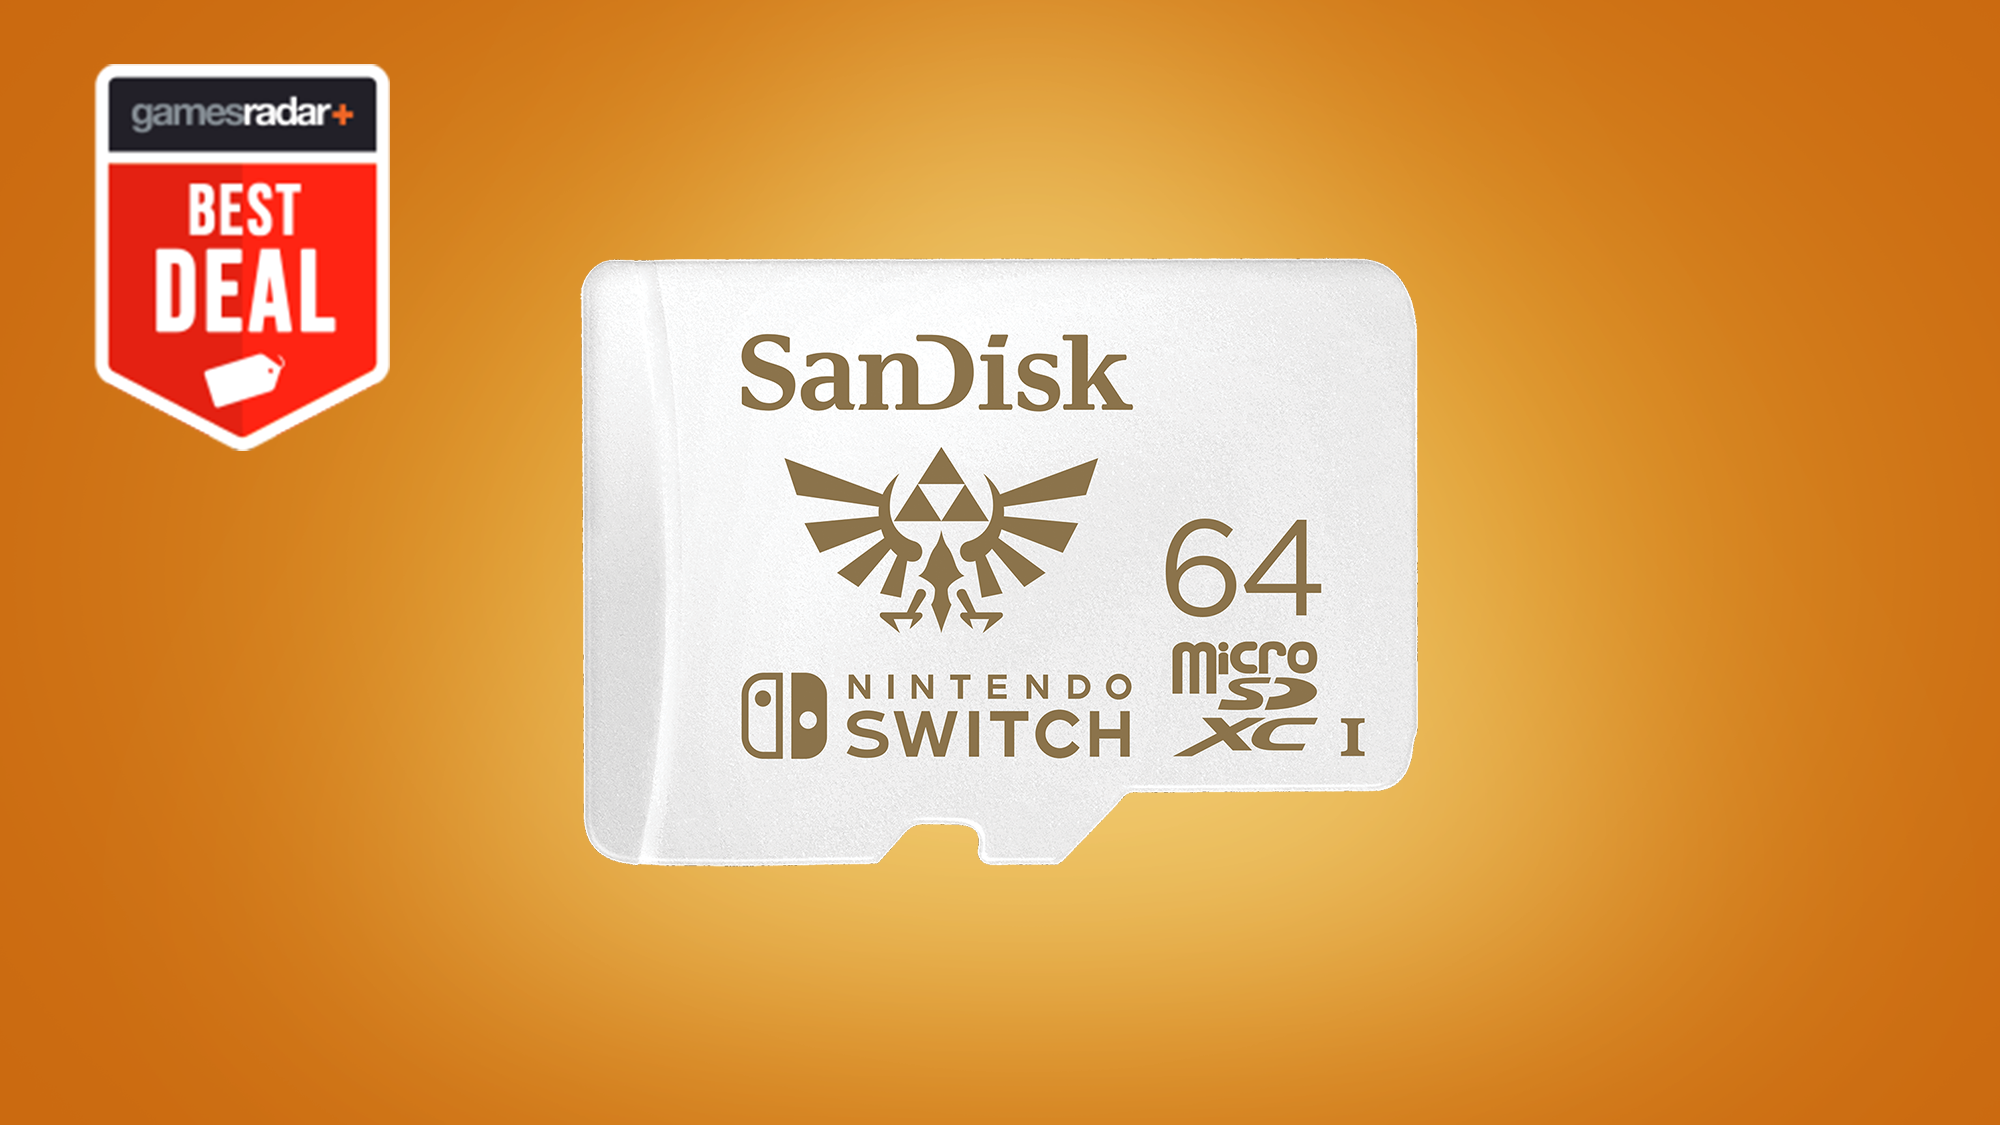 This Nintendo Switch memory card is currently 80% off